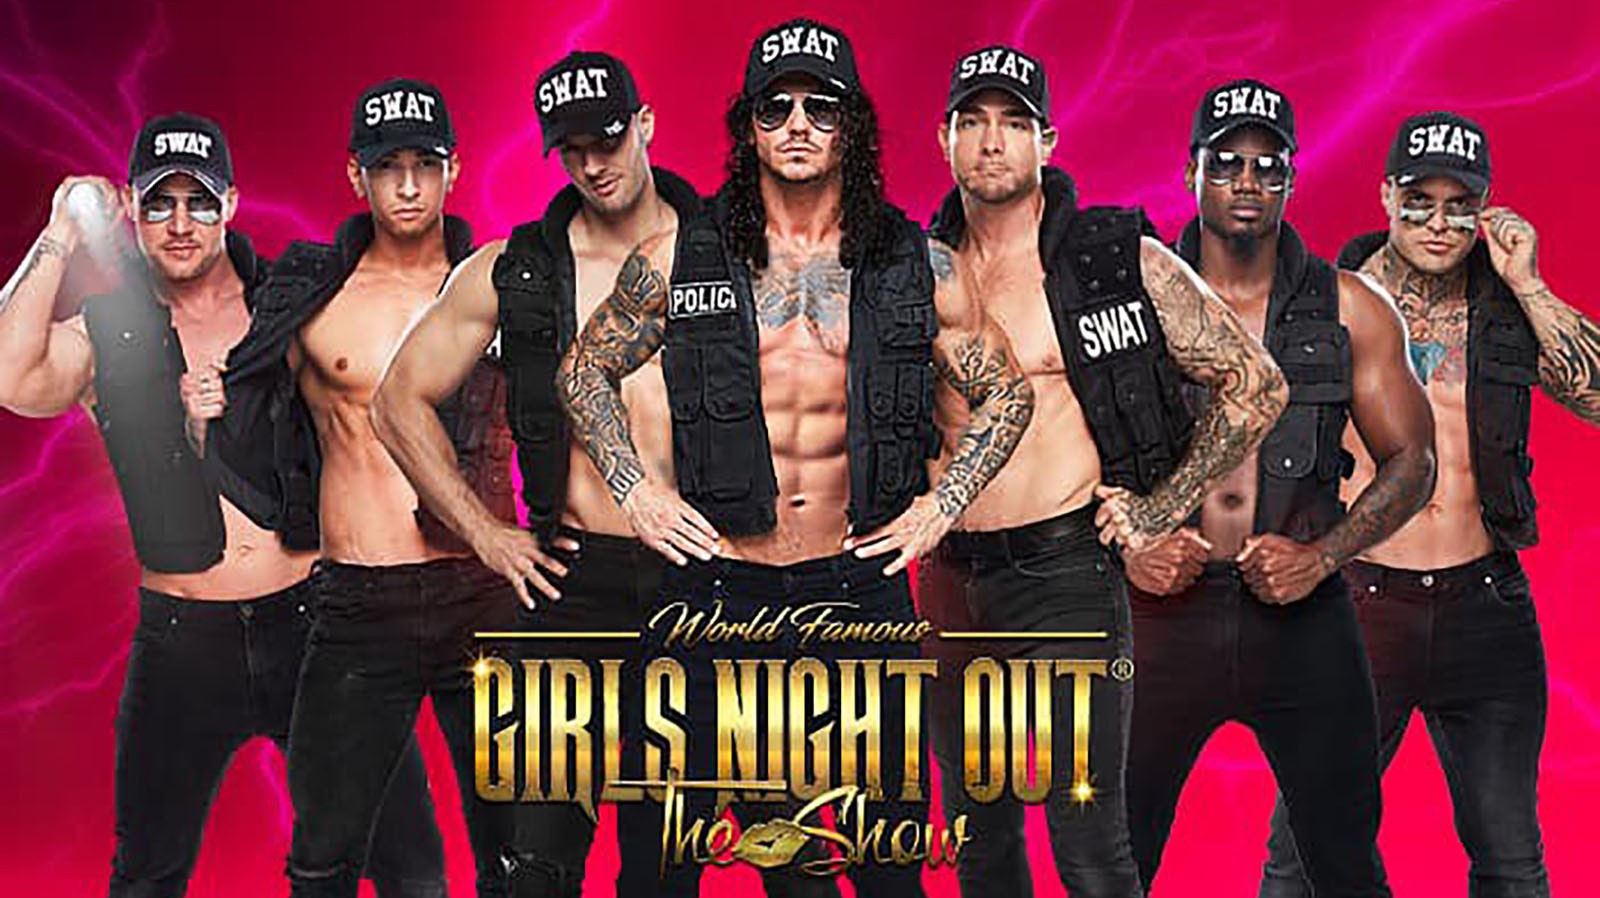 Girls Night Out by Eventbrite is a San Francisco-based events company that features male dancers.